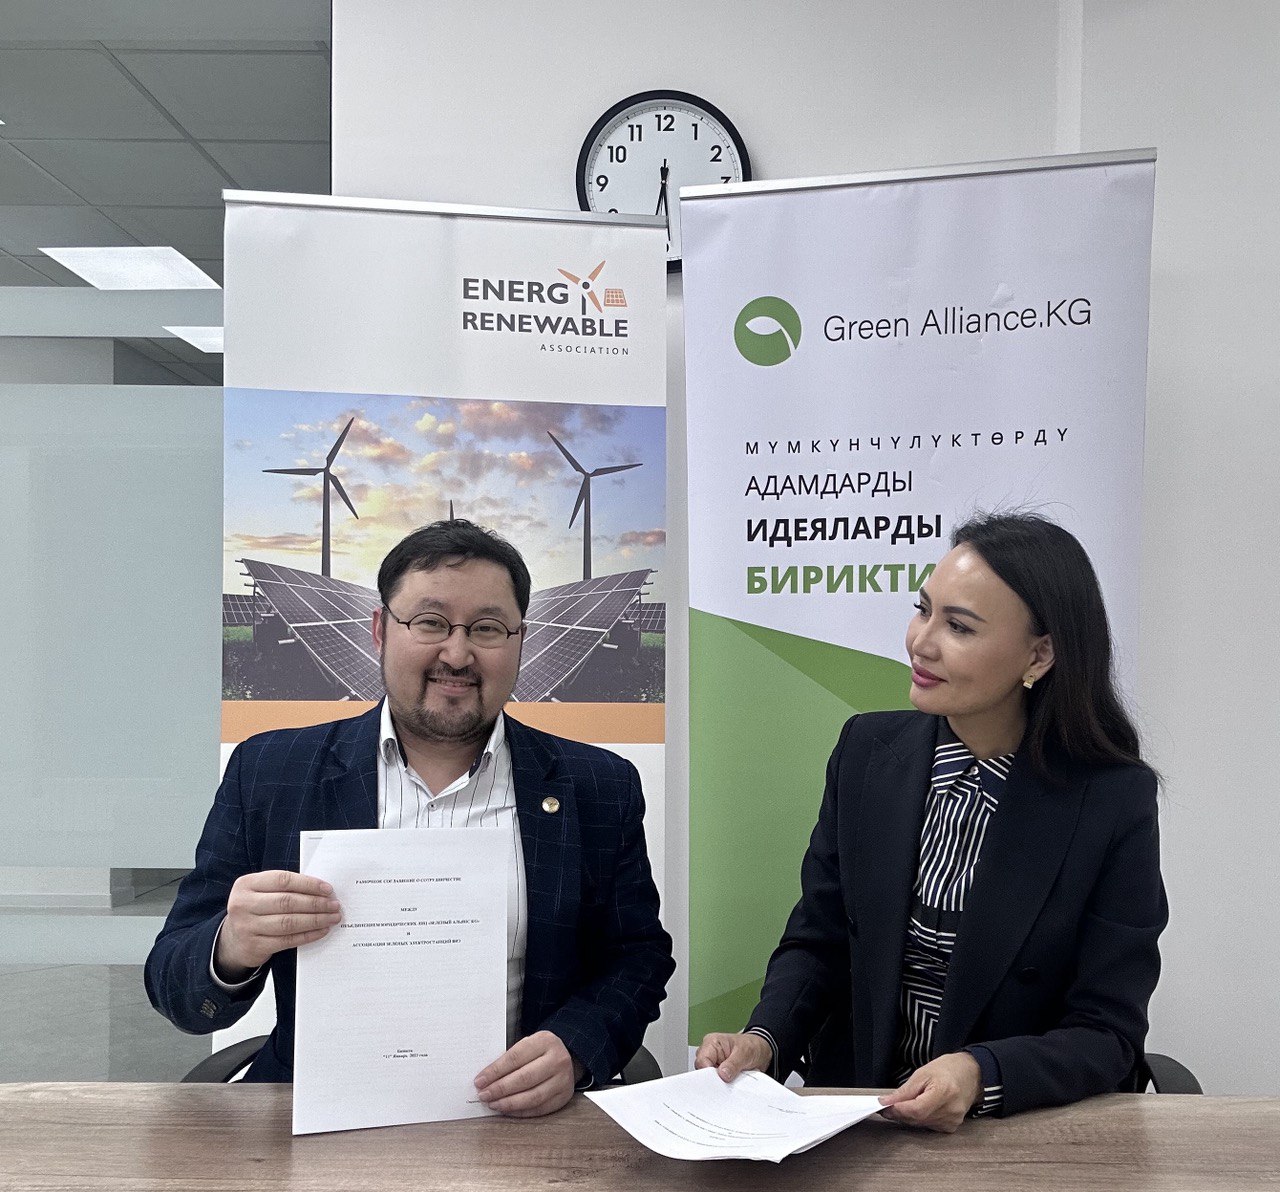 Association of Renewable Energy Stations and Green Alliance KG singed Memorandum of Cooperation